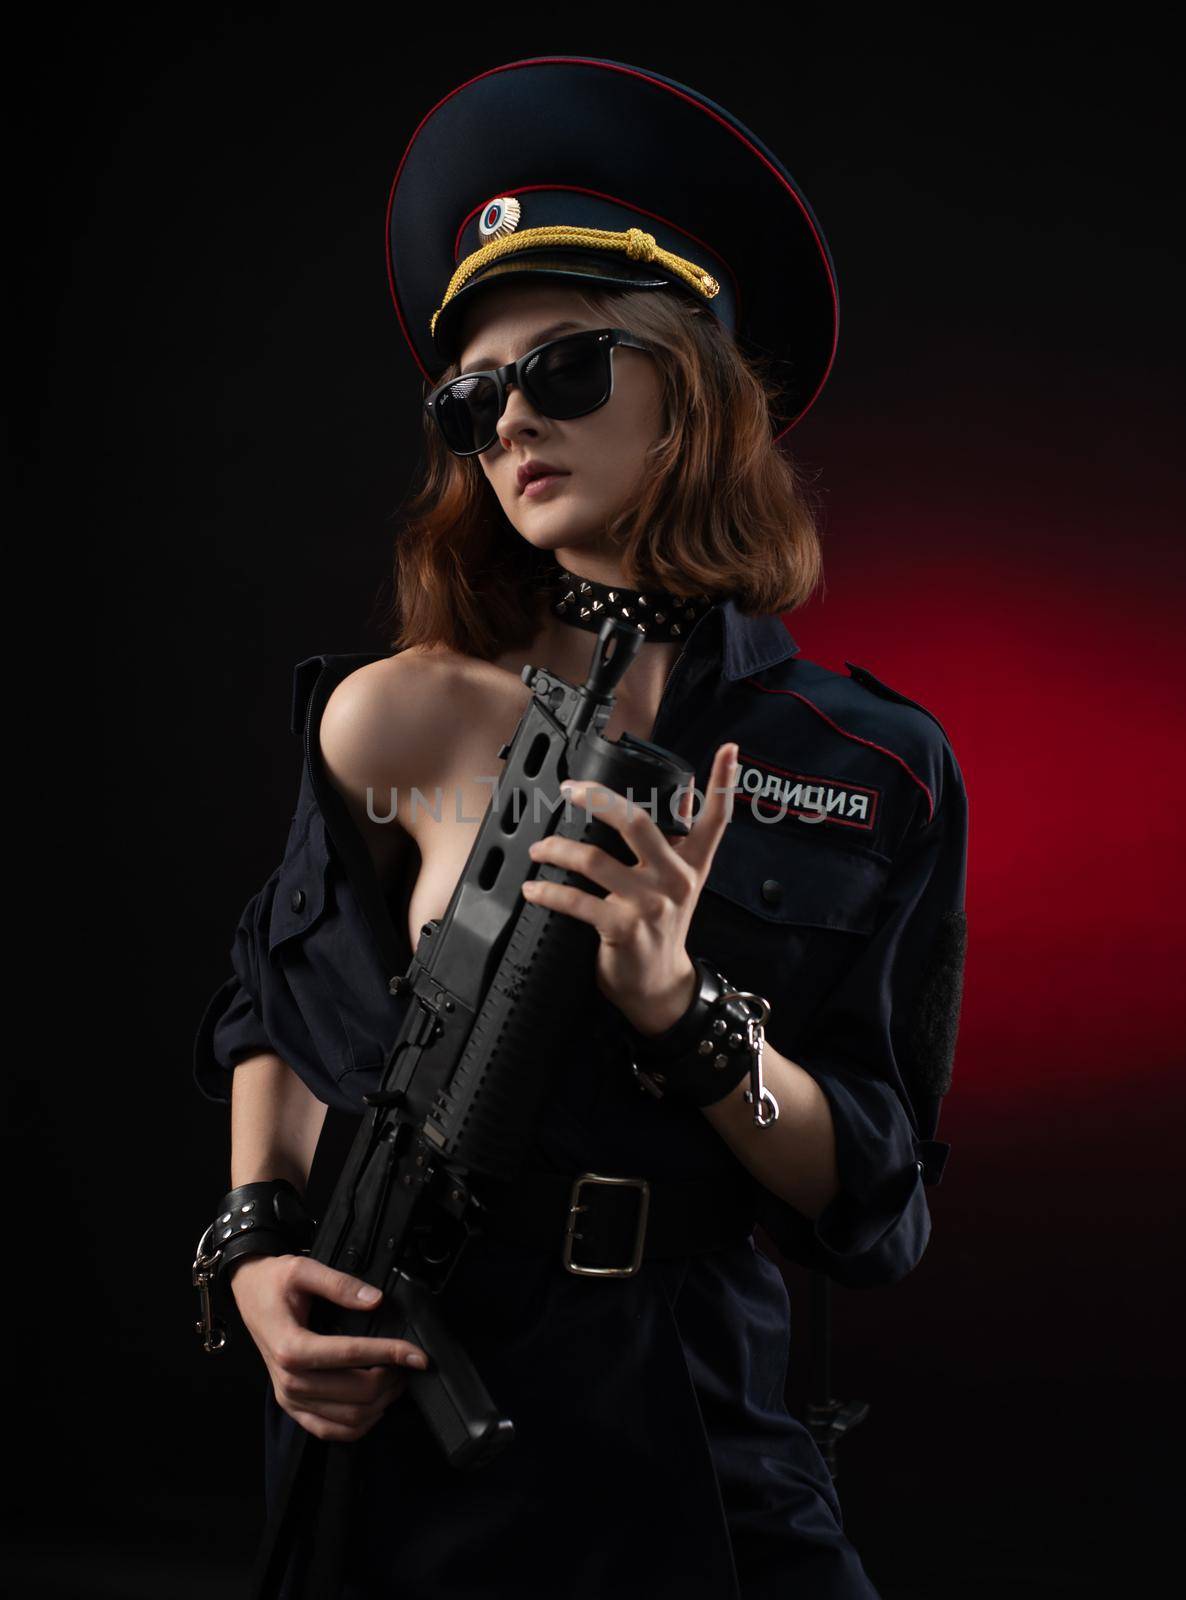 the naked girl in a police uniform with a gun . English translation of the police